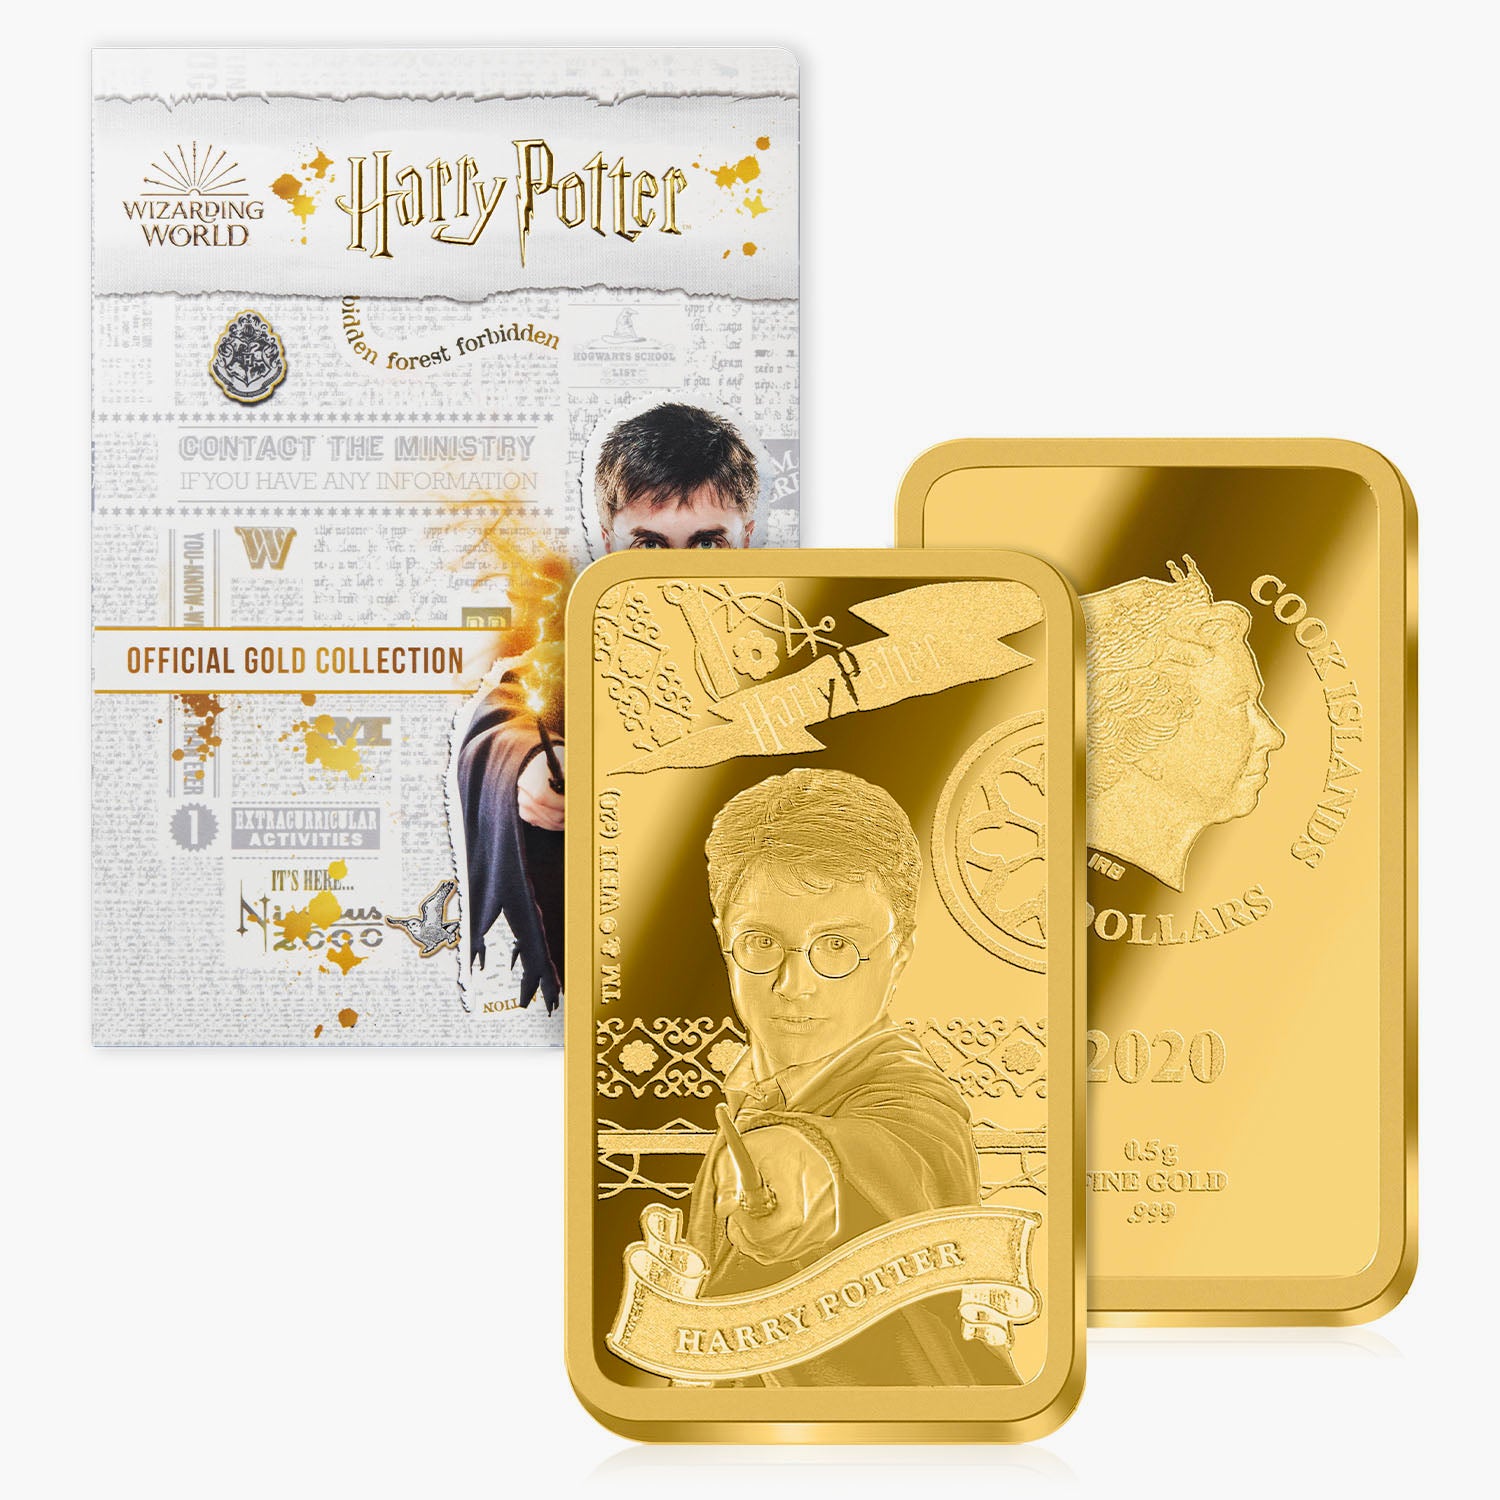 The Harry Potter Solid Gold Coin Collection